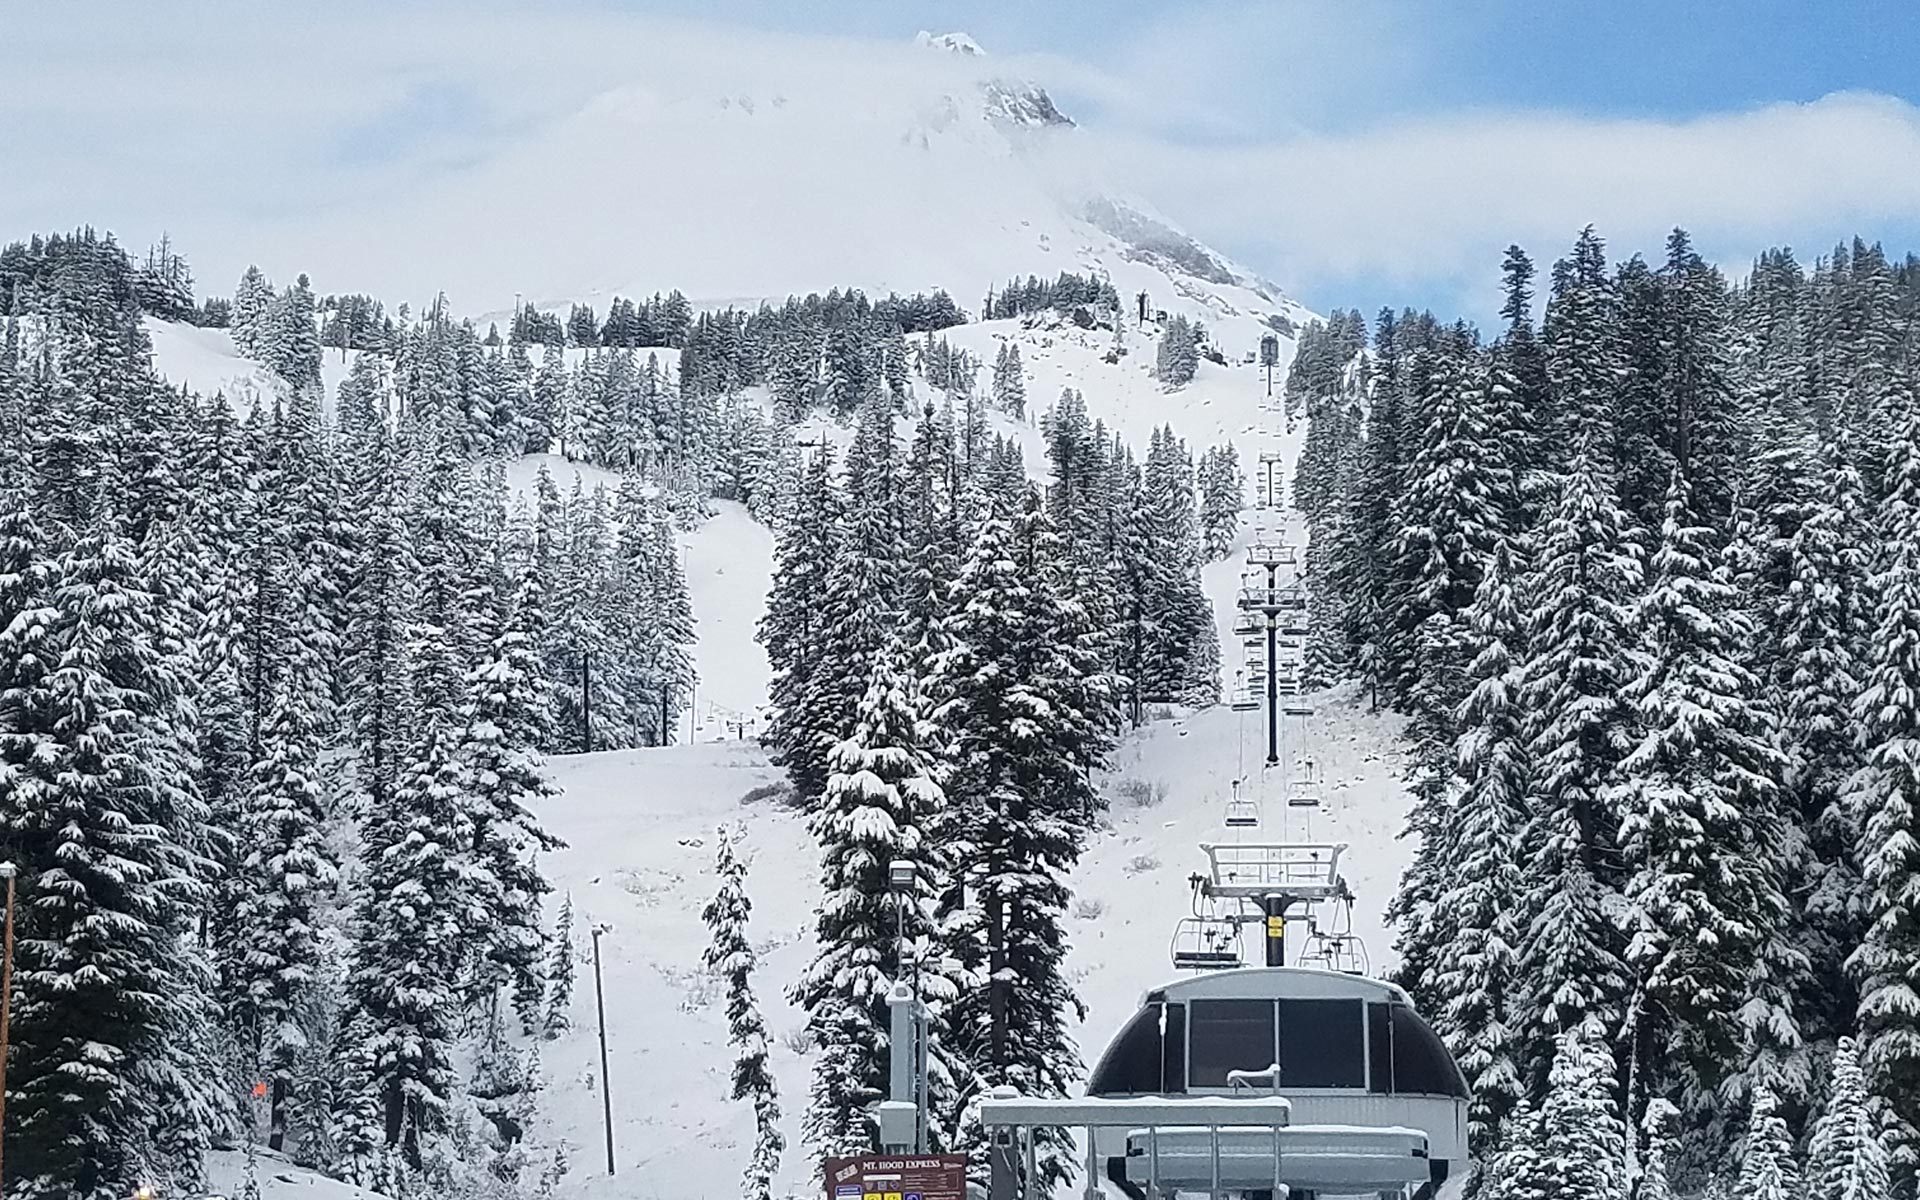 Mt Hood Meadows in Oregon. Mt Hood Meadows forced to evacuate skiers from chairlift due to a power problem.